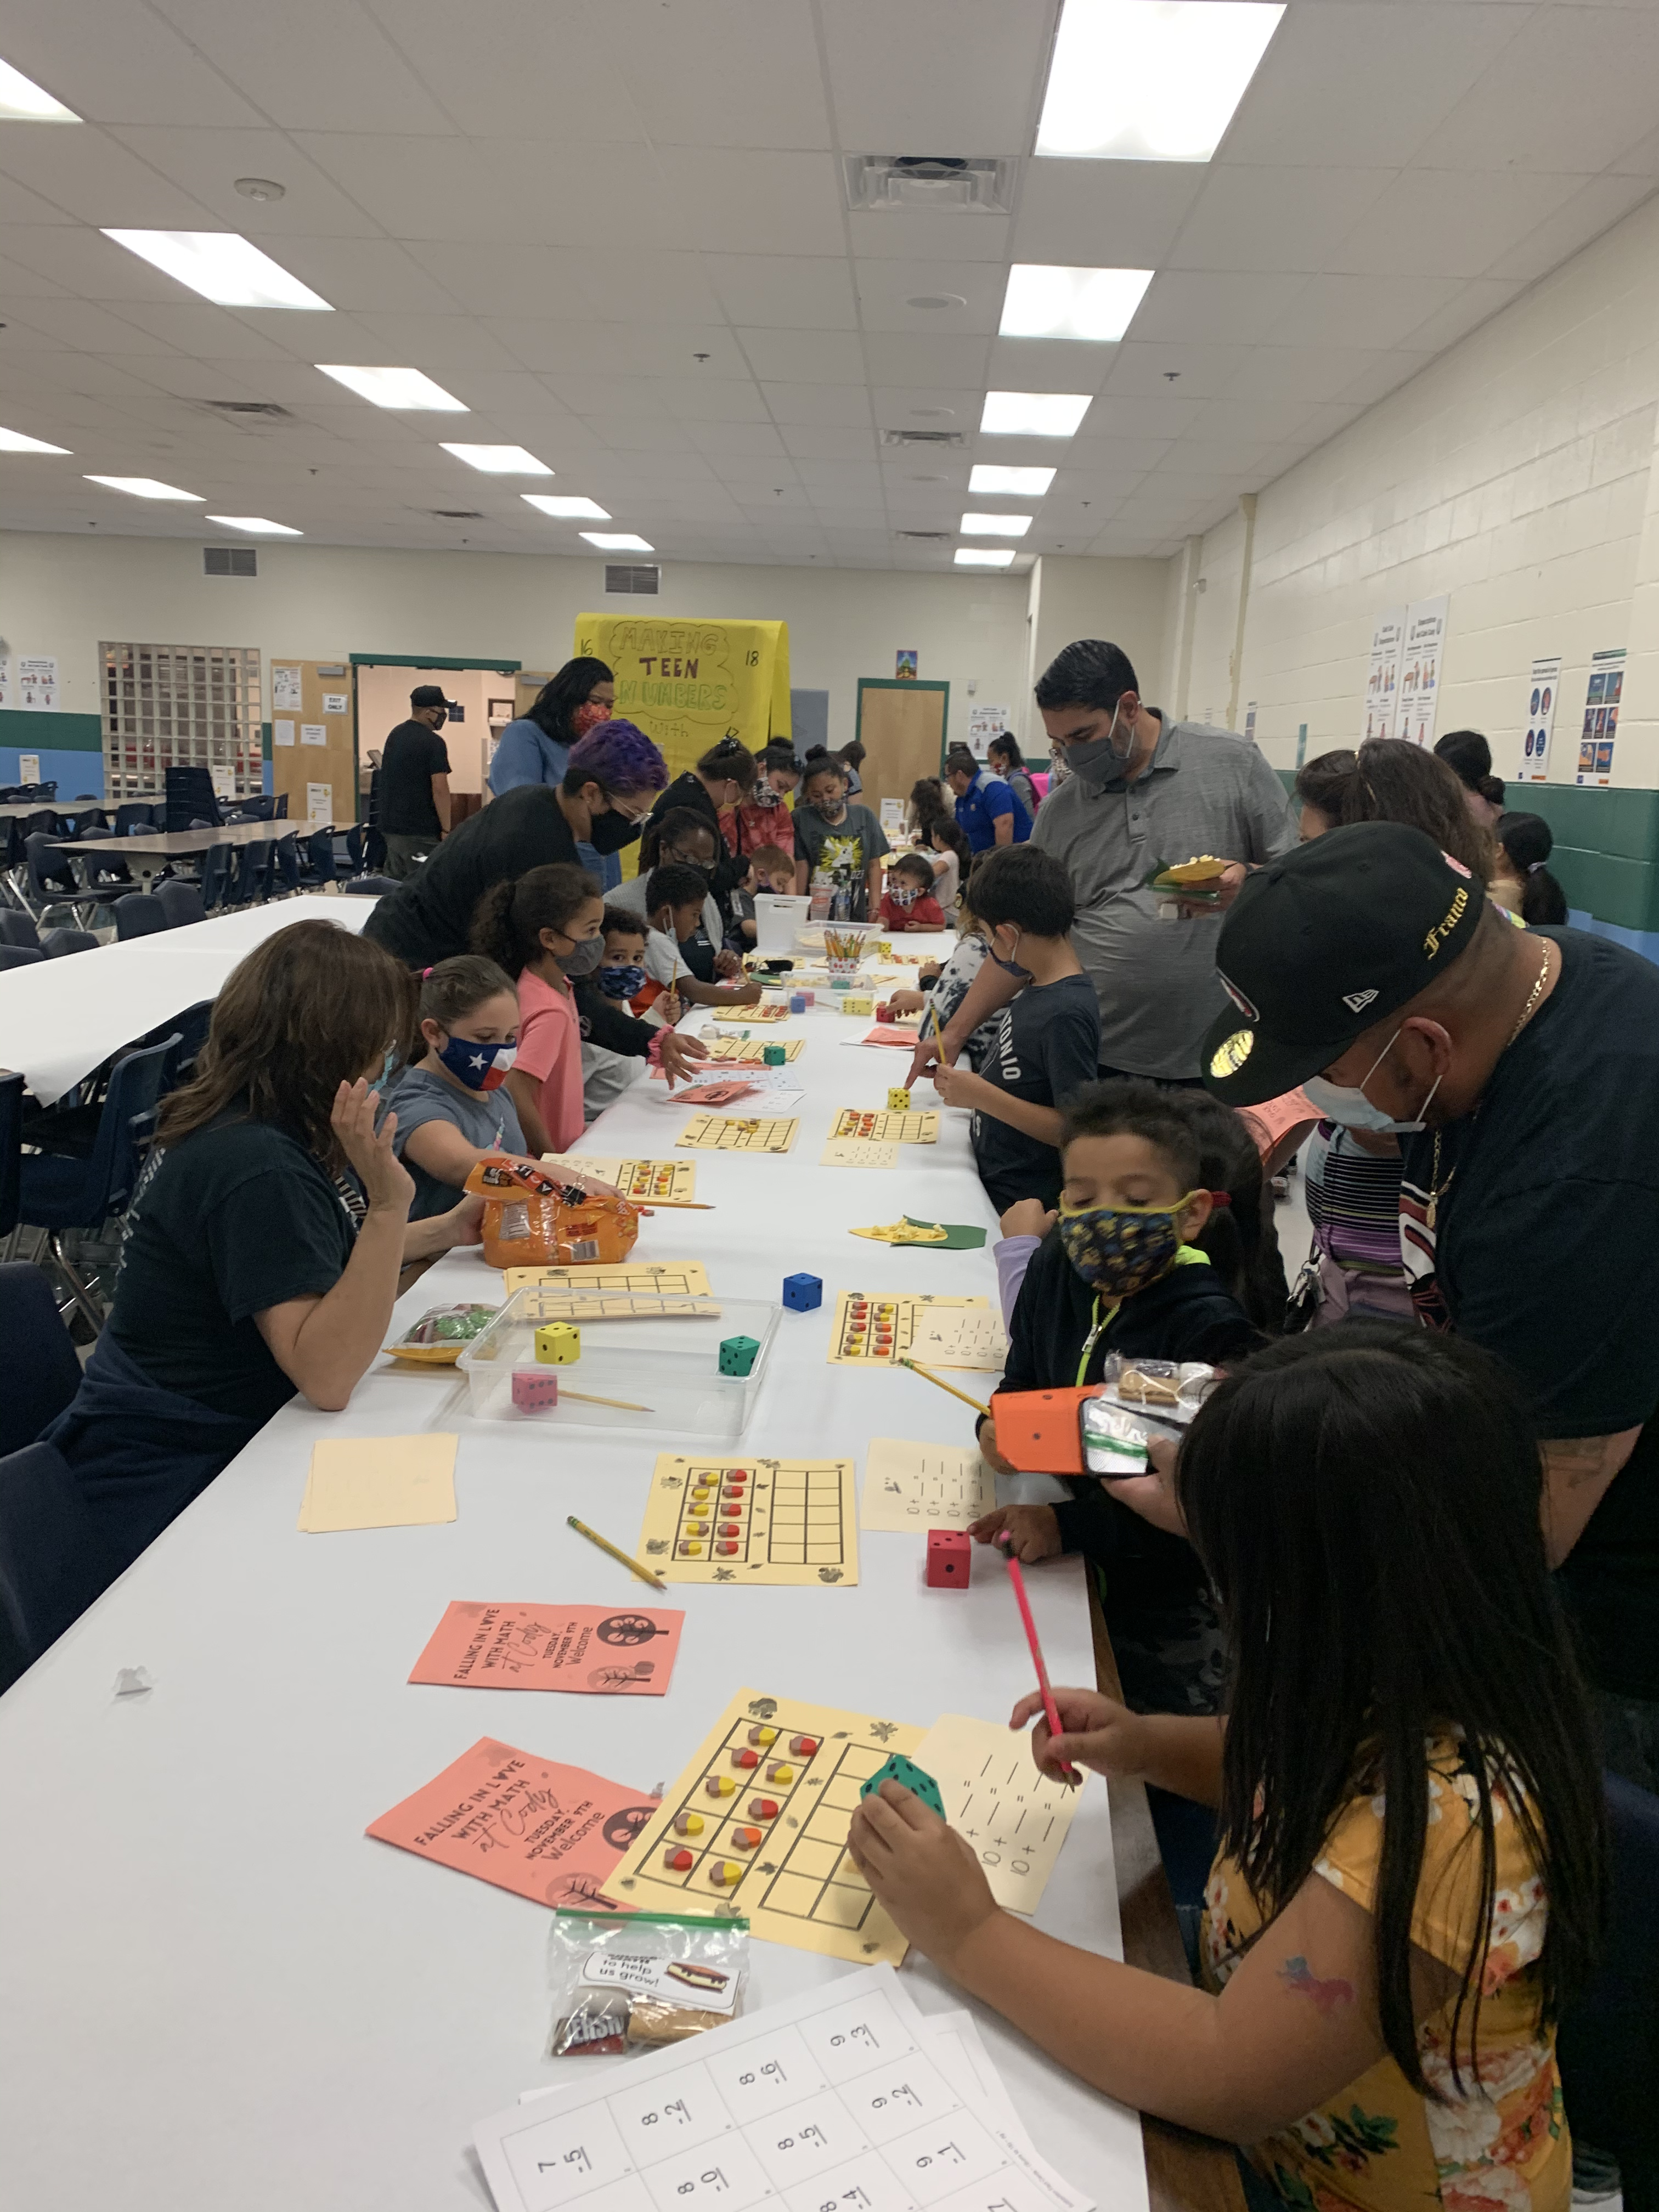 Crowd of parents and students playing Math games in the school cafeteria.